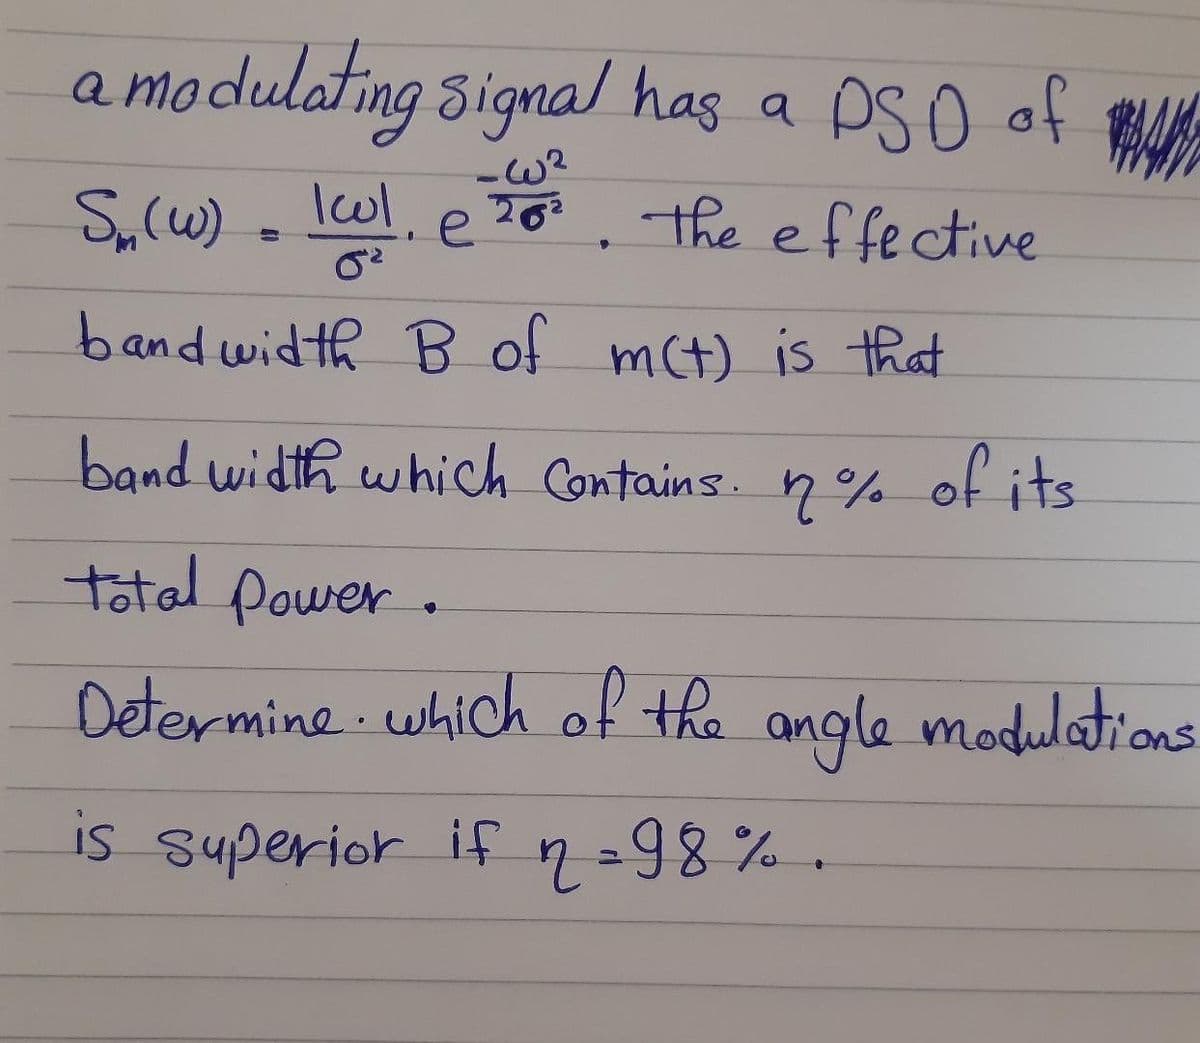 a modulating signal has a PSO of AK
S,(w) . lwl, e70. the effective
202
bandwidth B of mct) is that
band width which Contains. n%
of its
total power.
Determine which of the angle modultons
is superior if 2=98% .
